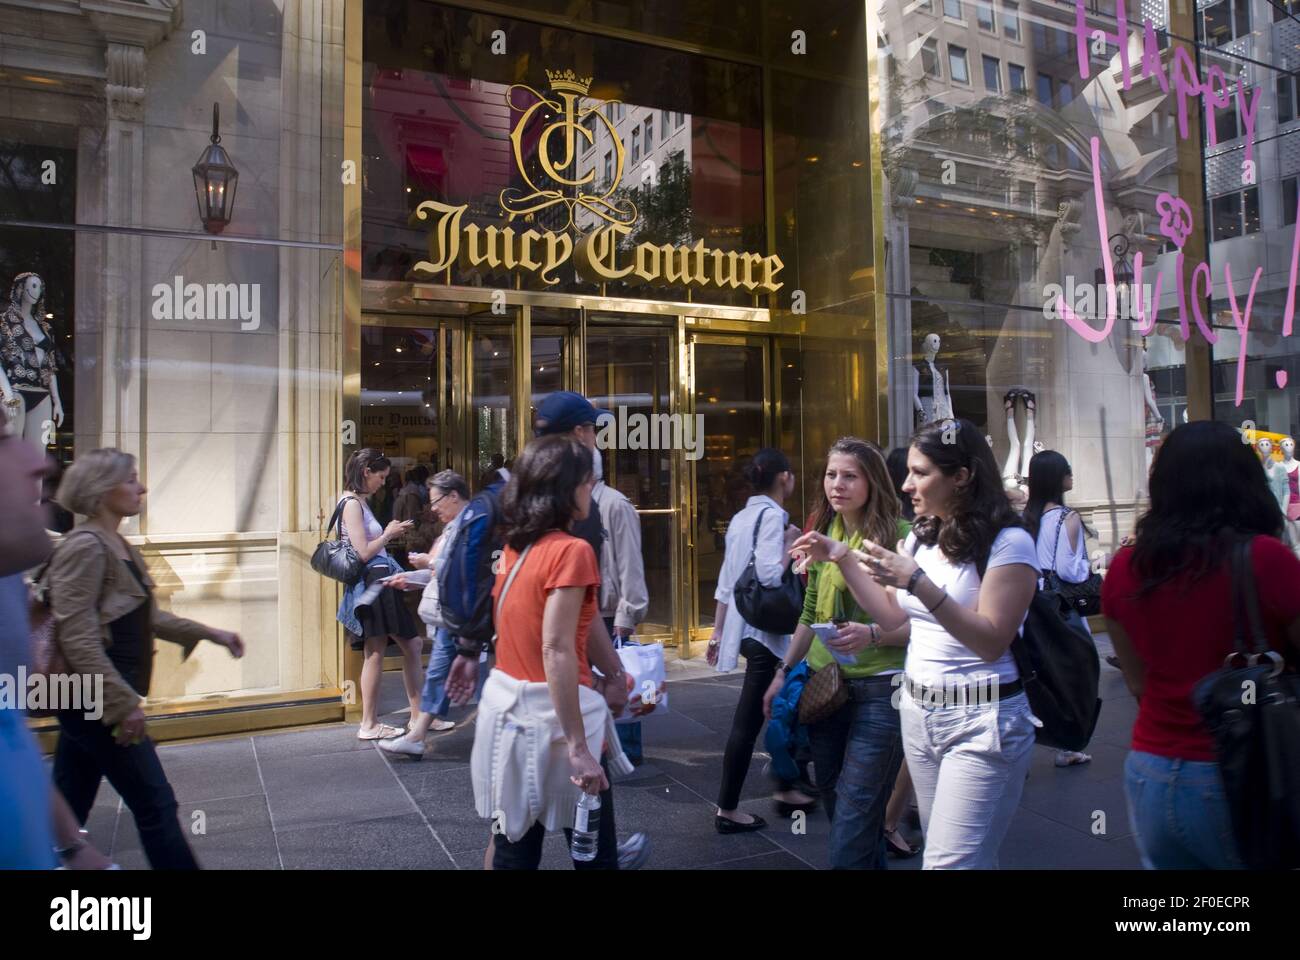 A teen with her Juicy Couture backpack on a street in New York on Saturday,  June 16, 2018. Primarily associated with velour track suits, Juicy Couture  was sold to Authentic Brands Group